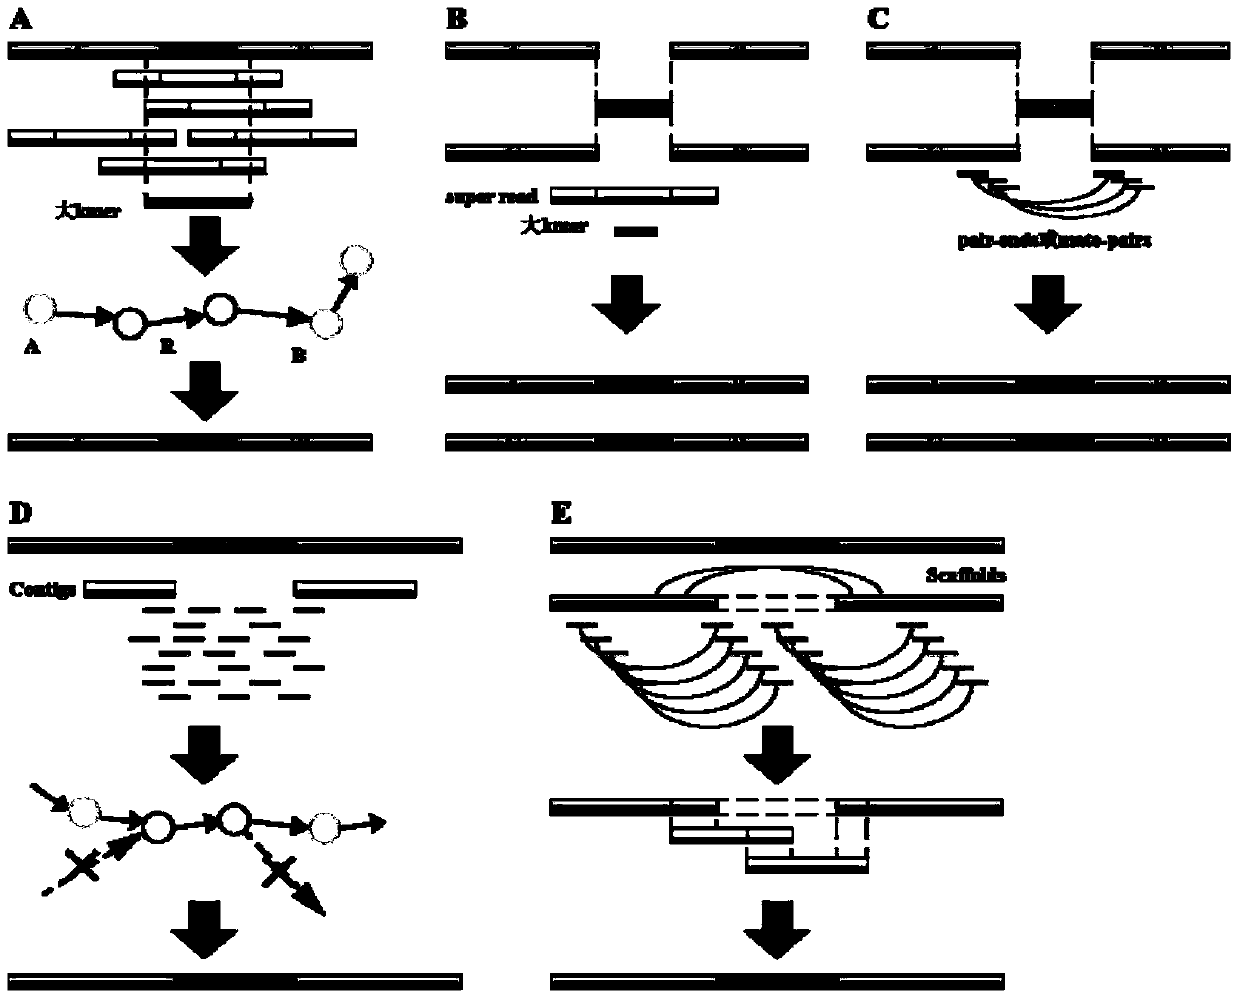 Genome de novo assembly method based on high-throughput sequencing data